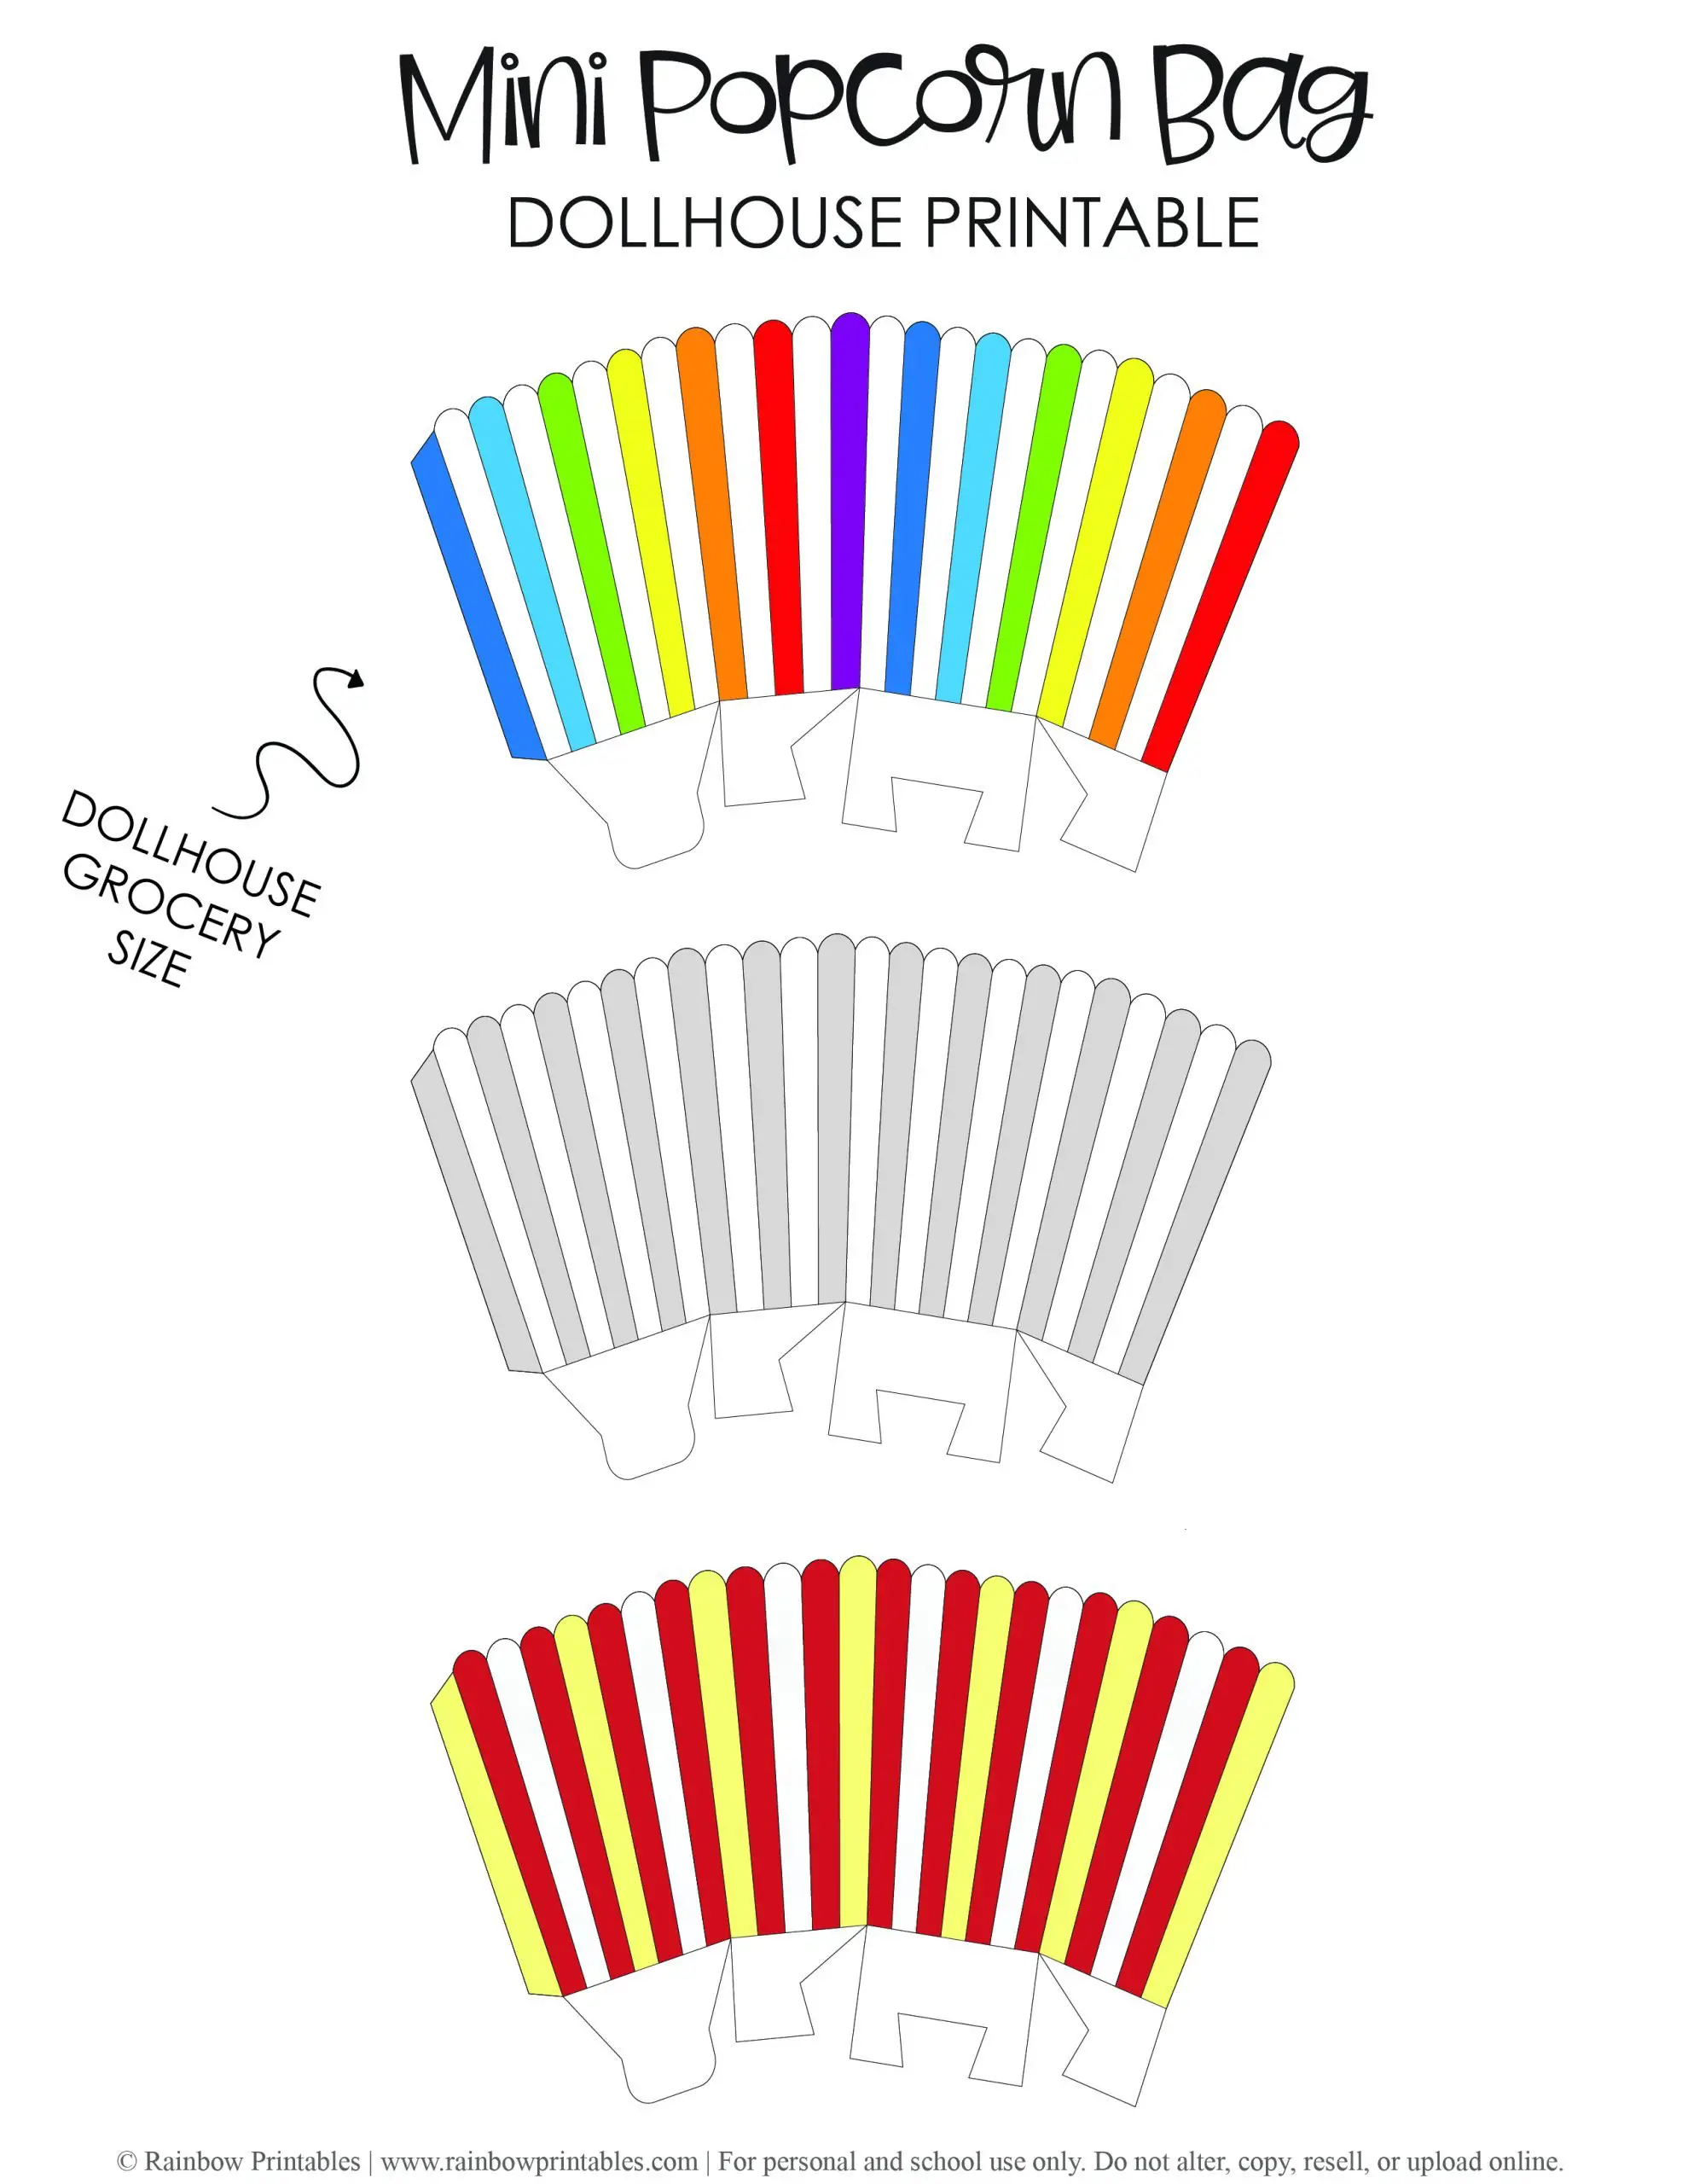 Rainbow BW and Movie Classic Striped Mini Popcorn Bag Printable Grocery Snack for Kids DIY Paper Crafts Cut & Make Dollhouse Miniature